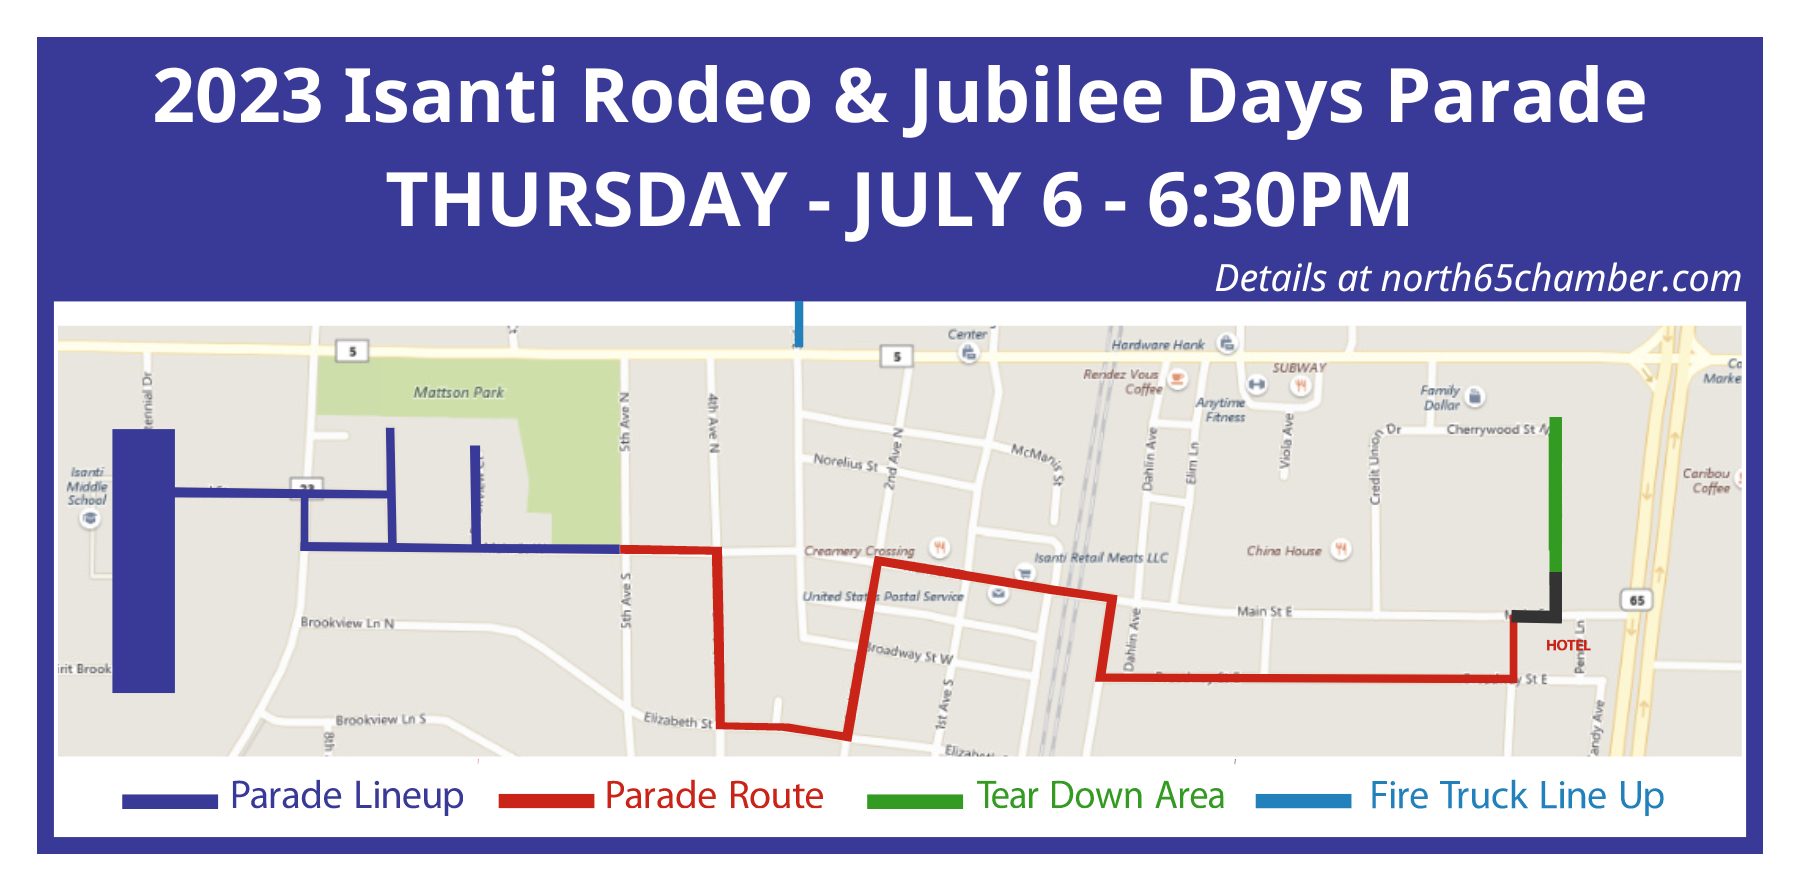 Parade Route Map.pdf